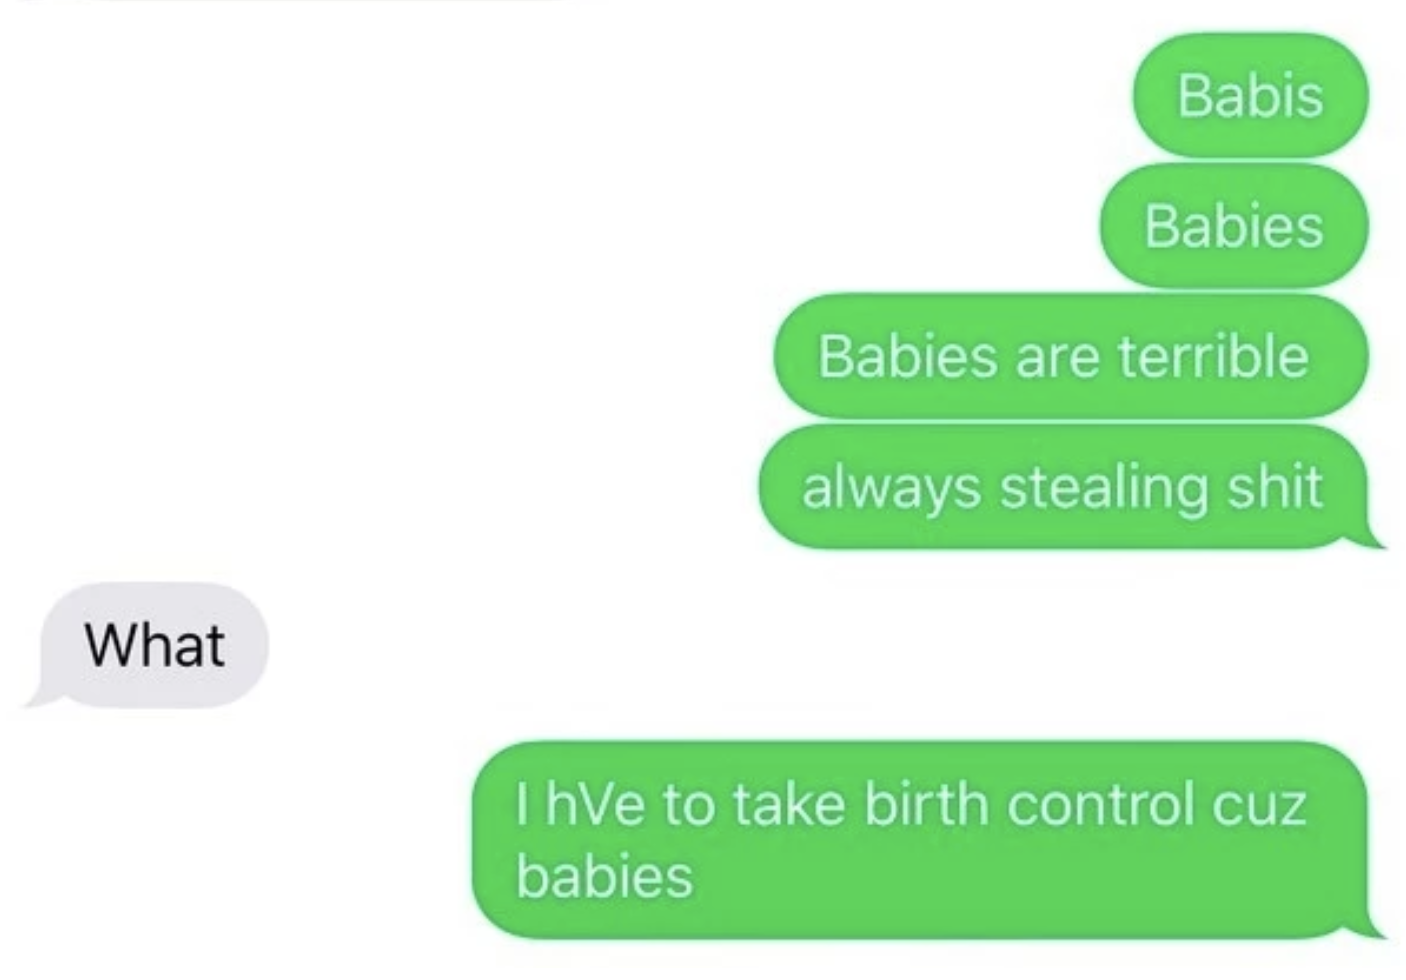 &quot;I hVe to take birth control cuz babies&quot;